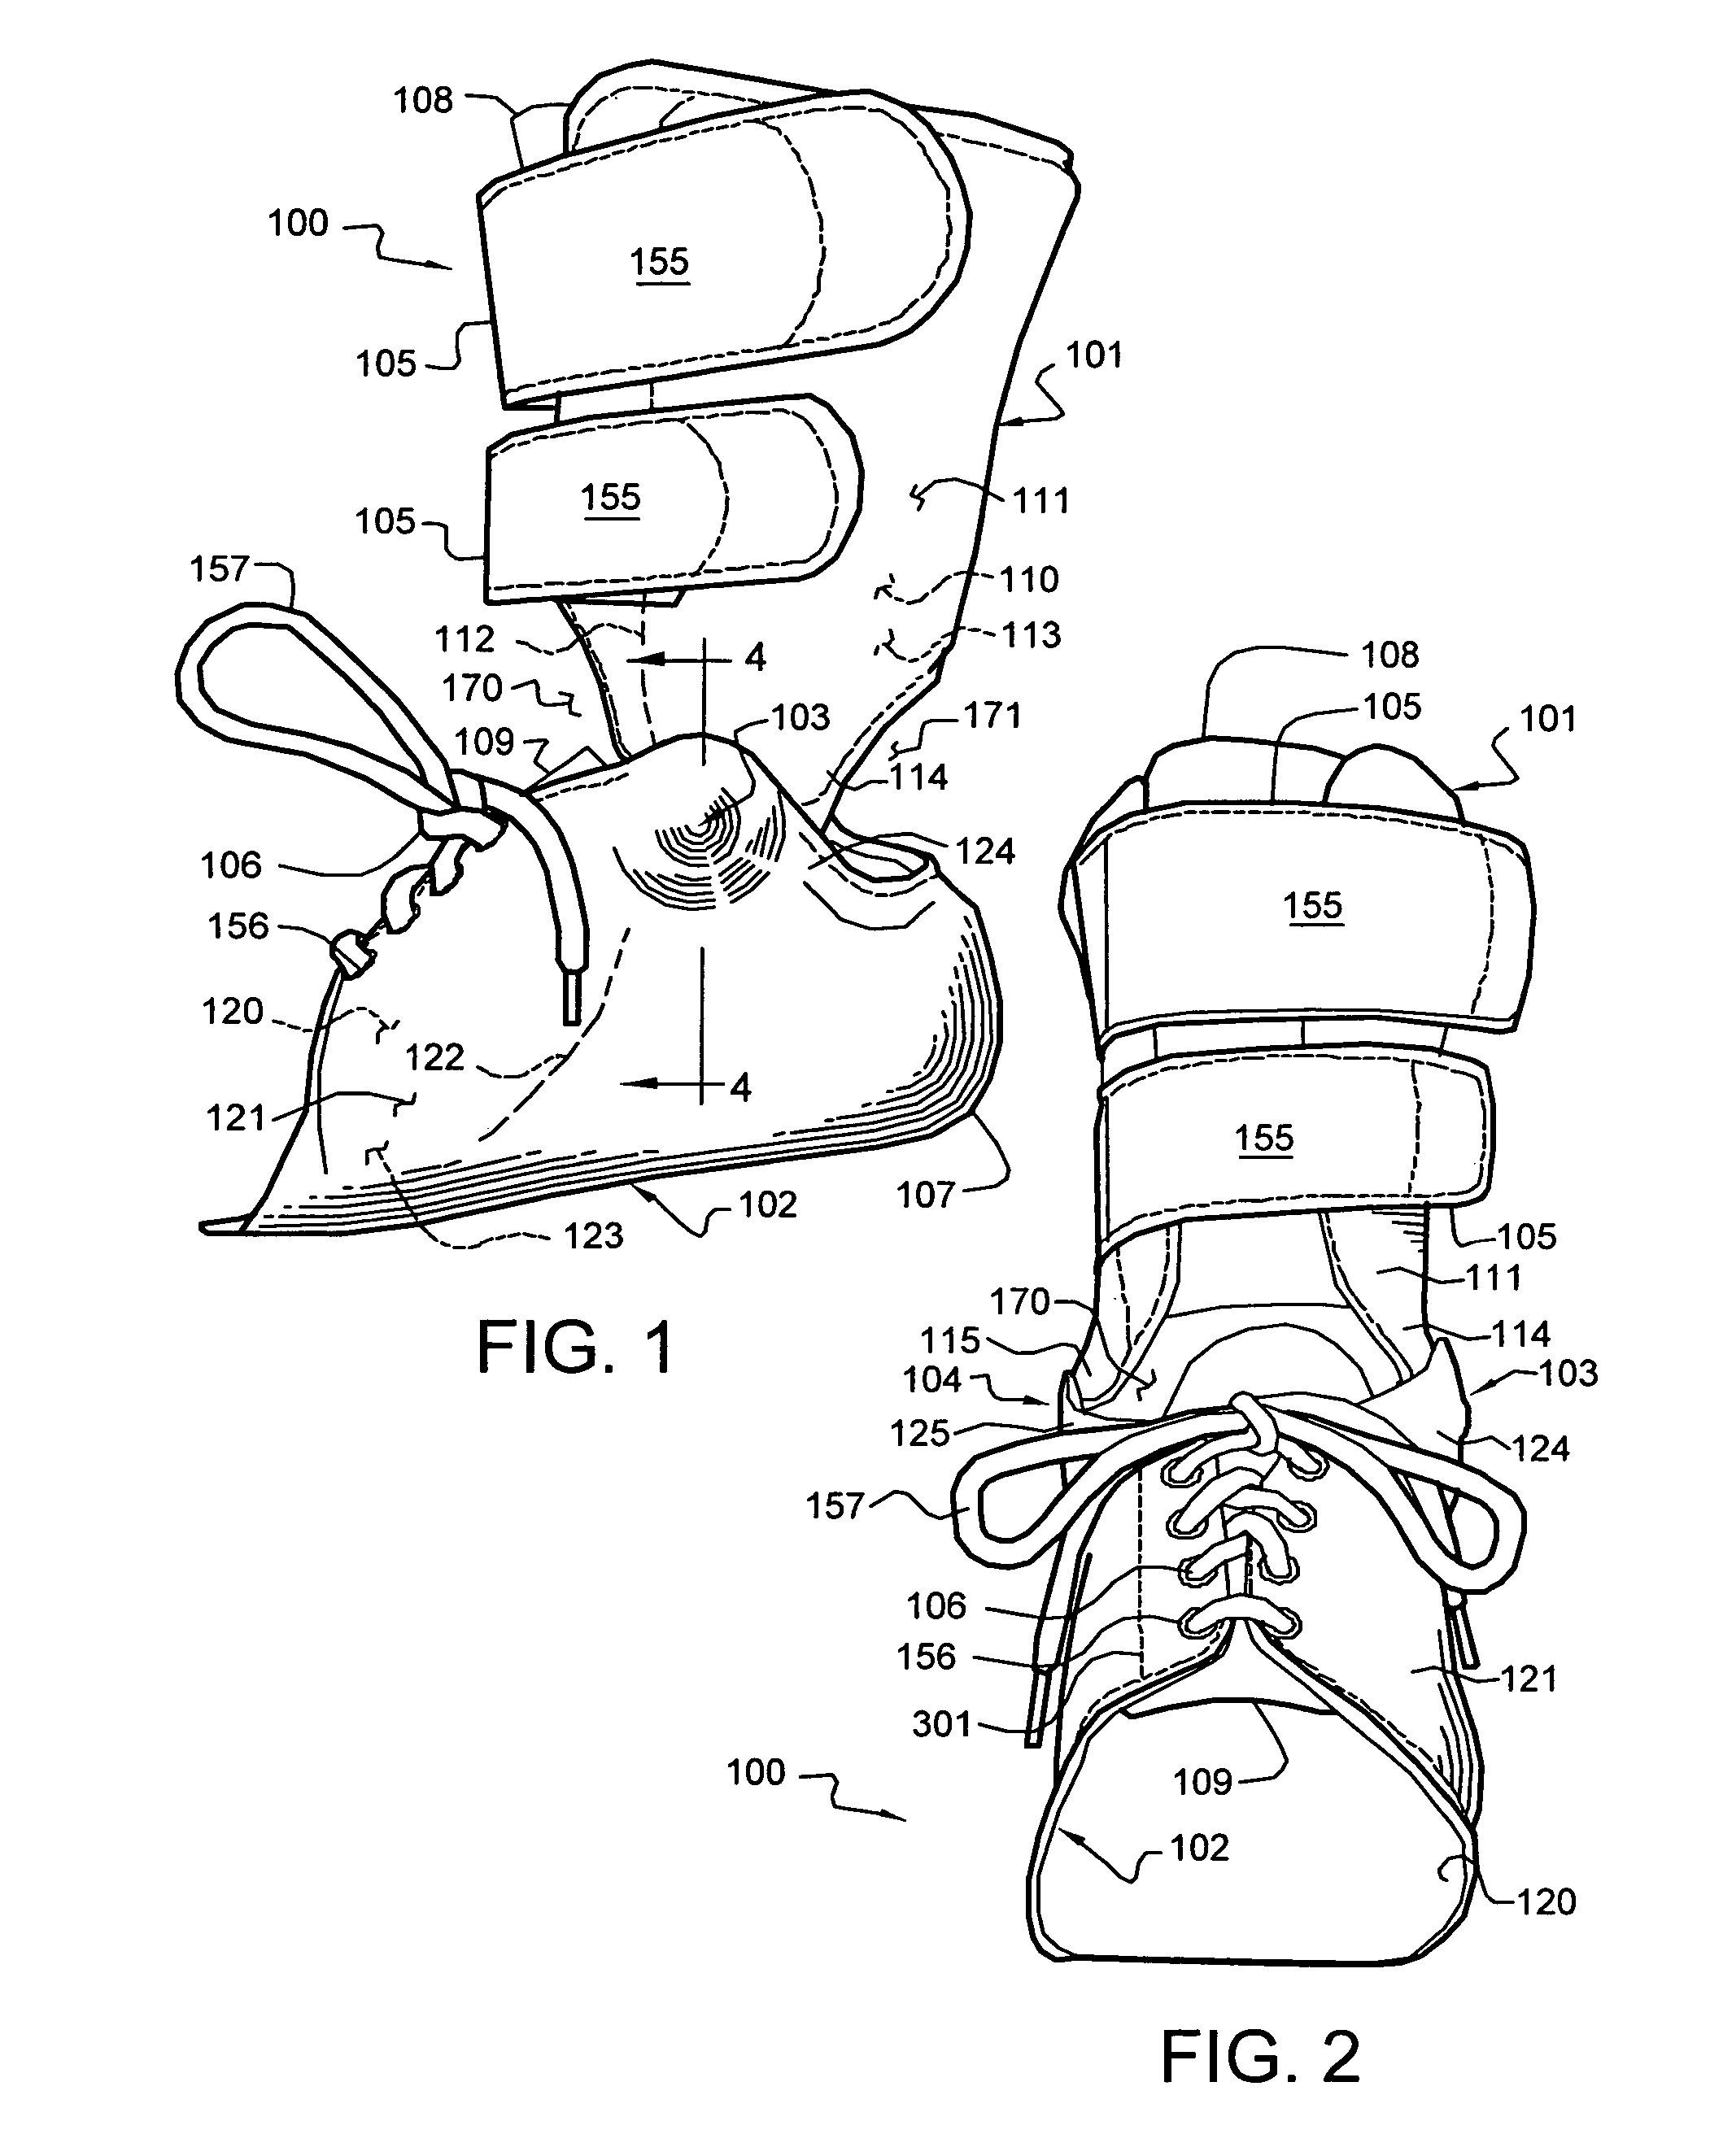 Articulated custom ankle-foot orthosis systems